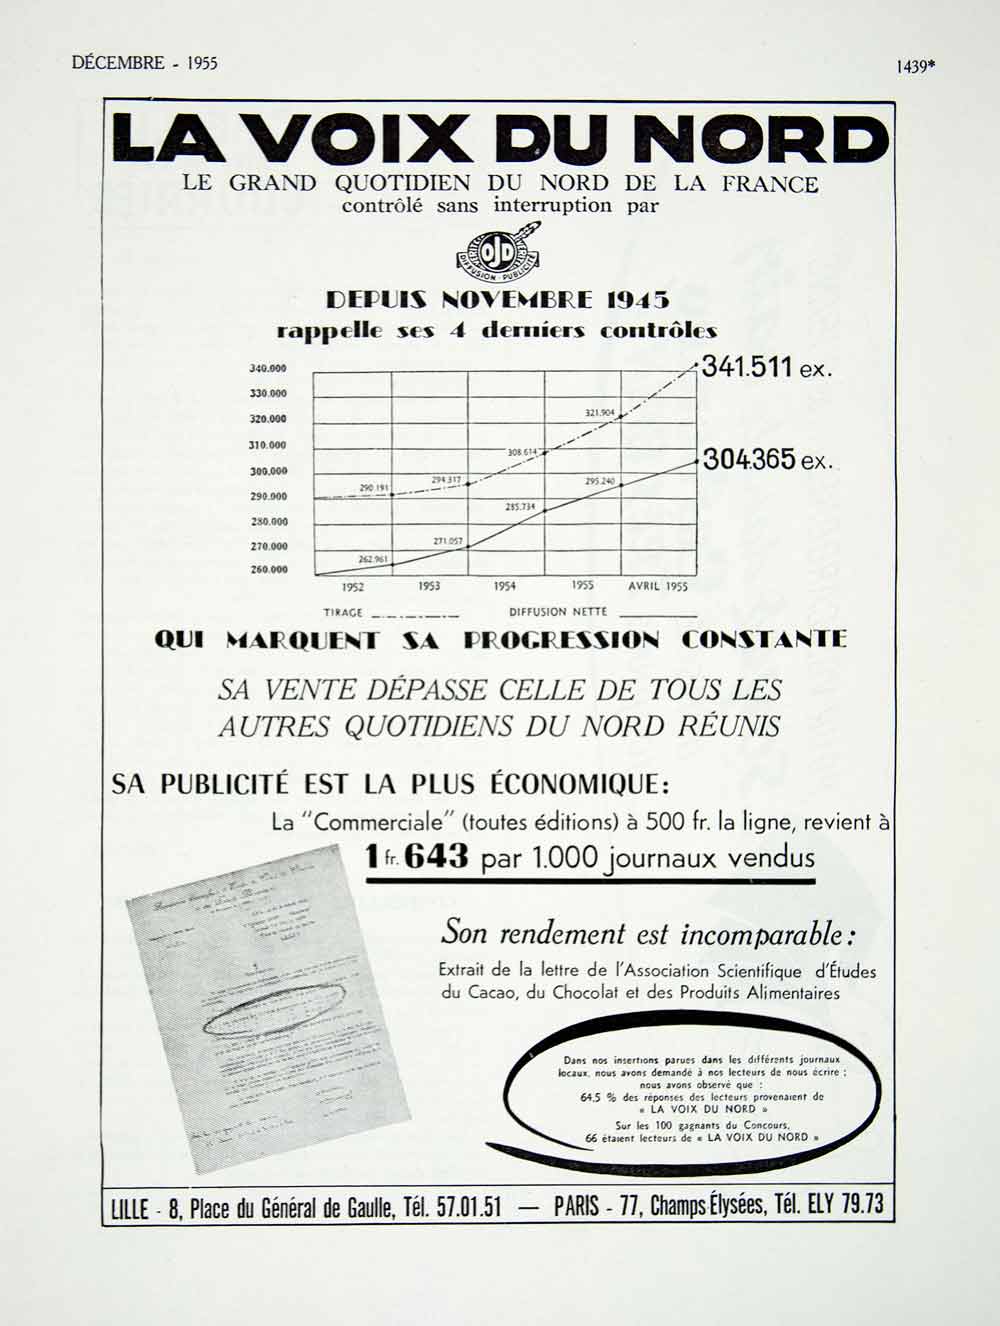 1955 Ad Voix du Nord French Newspaper Circulation Advertising France VEN6